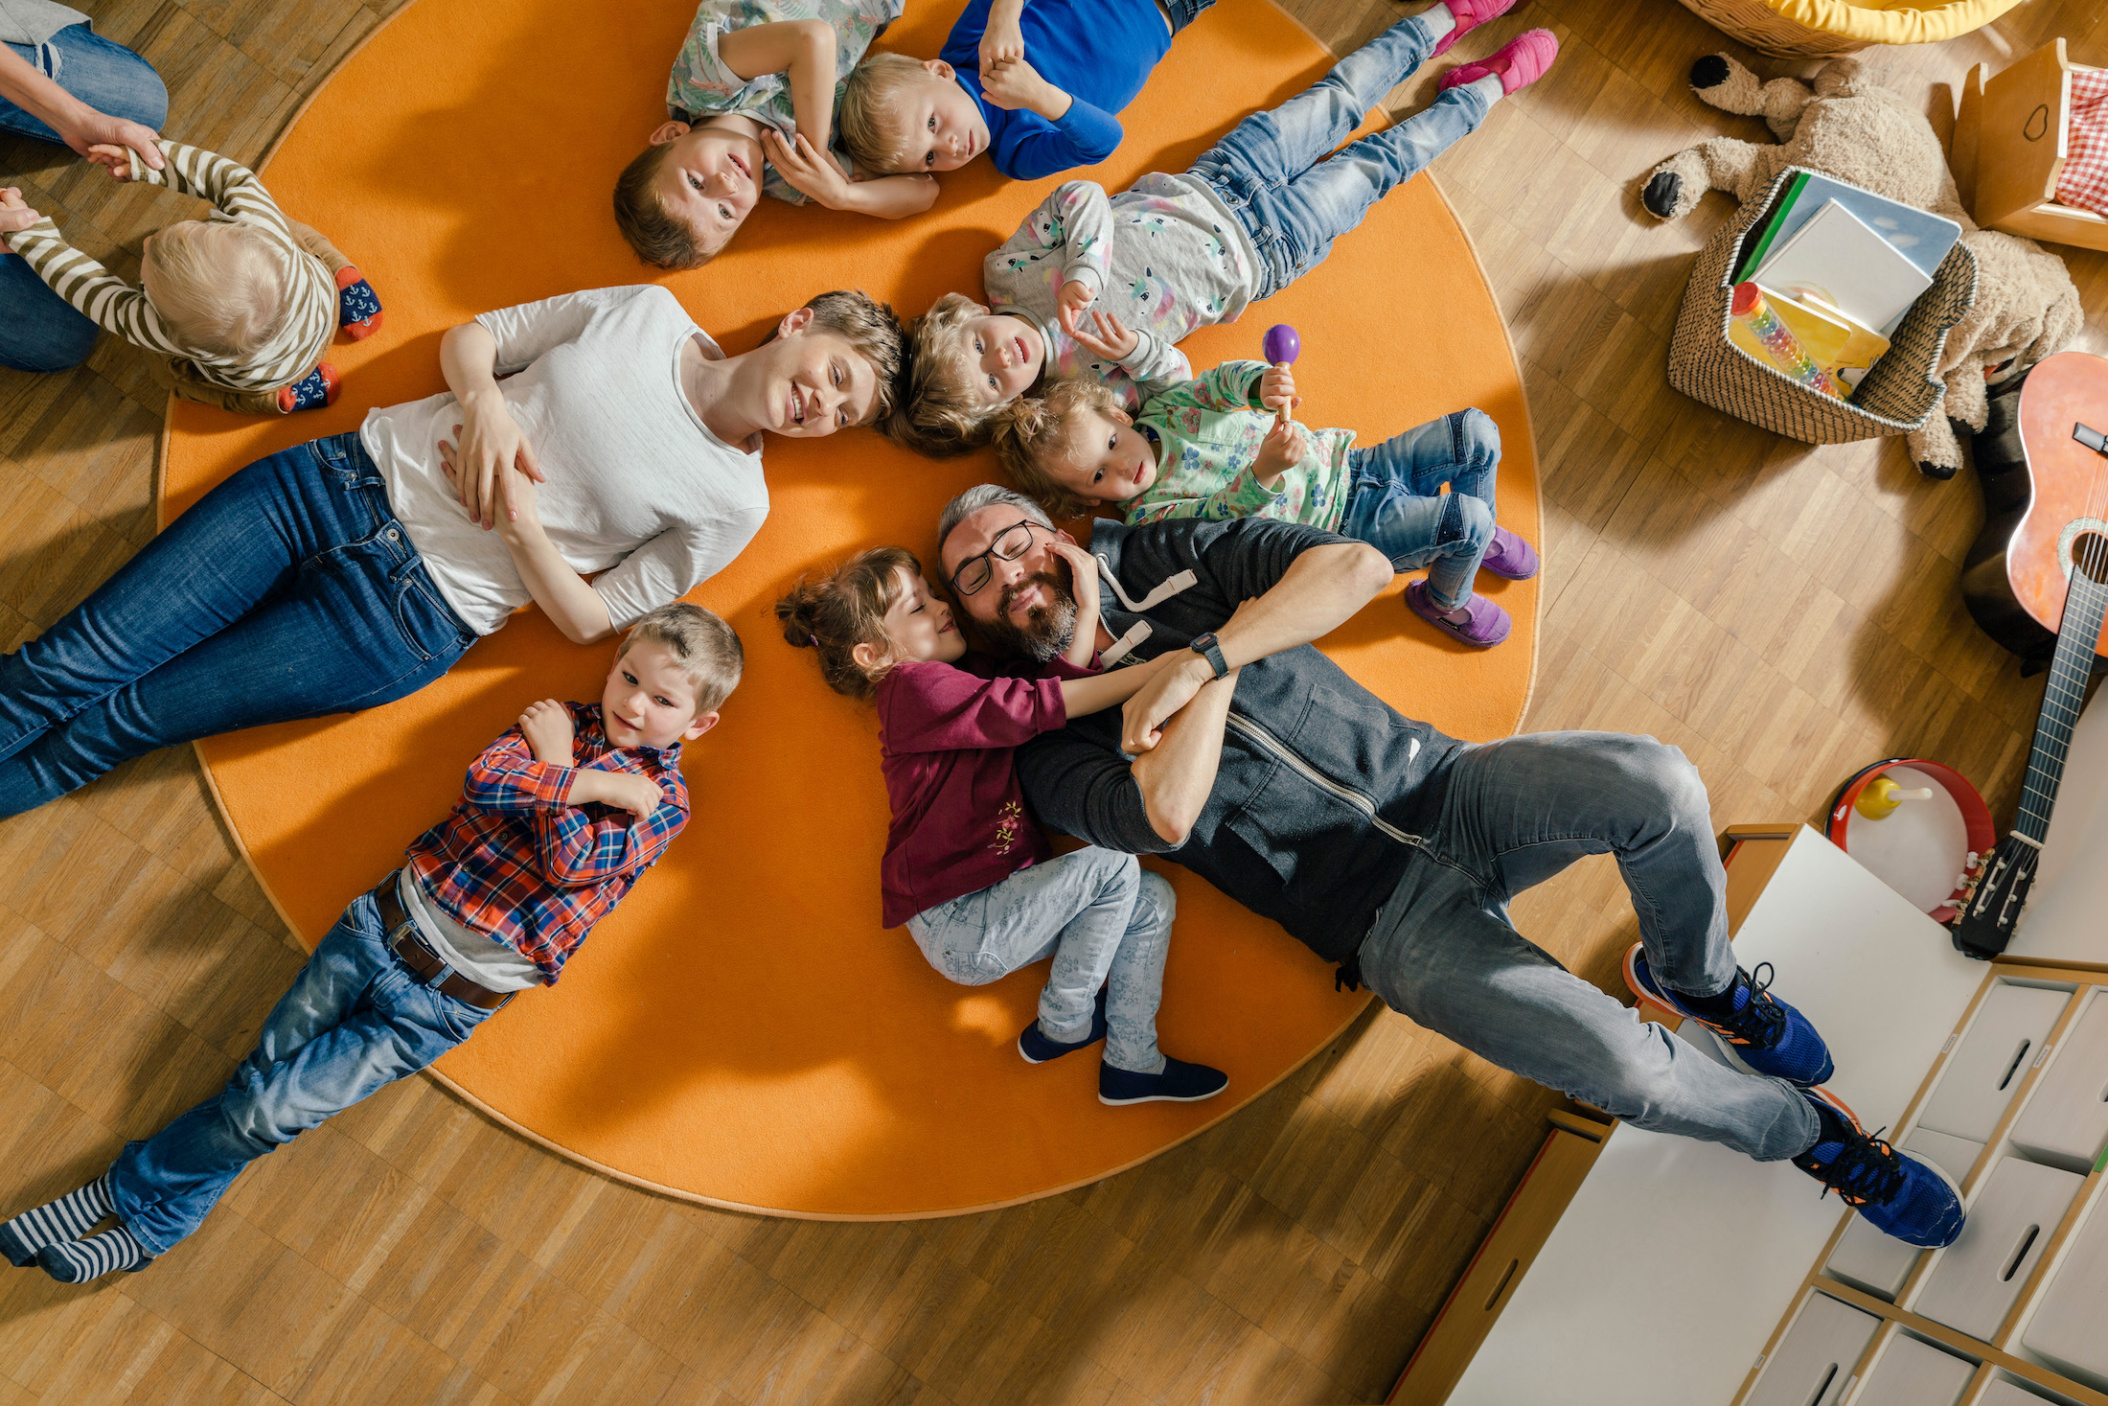 Children and teachers laying on carpet in Daycare center, Pre-school or Kindergarten, Cologne, NRW, Germany